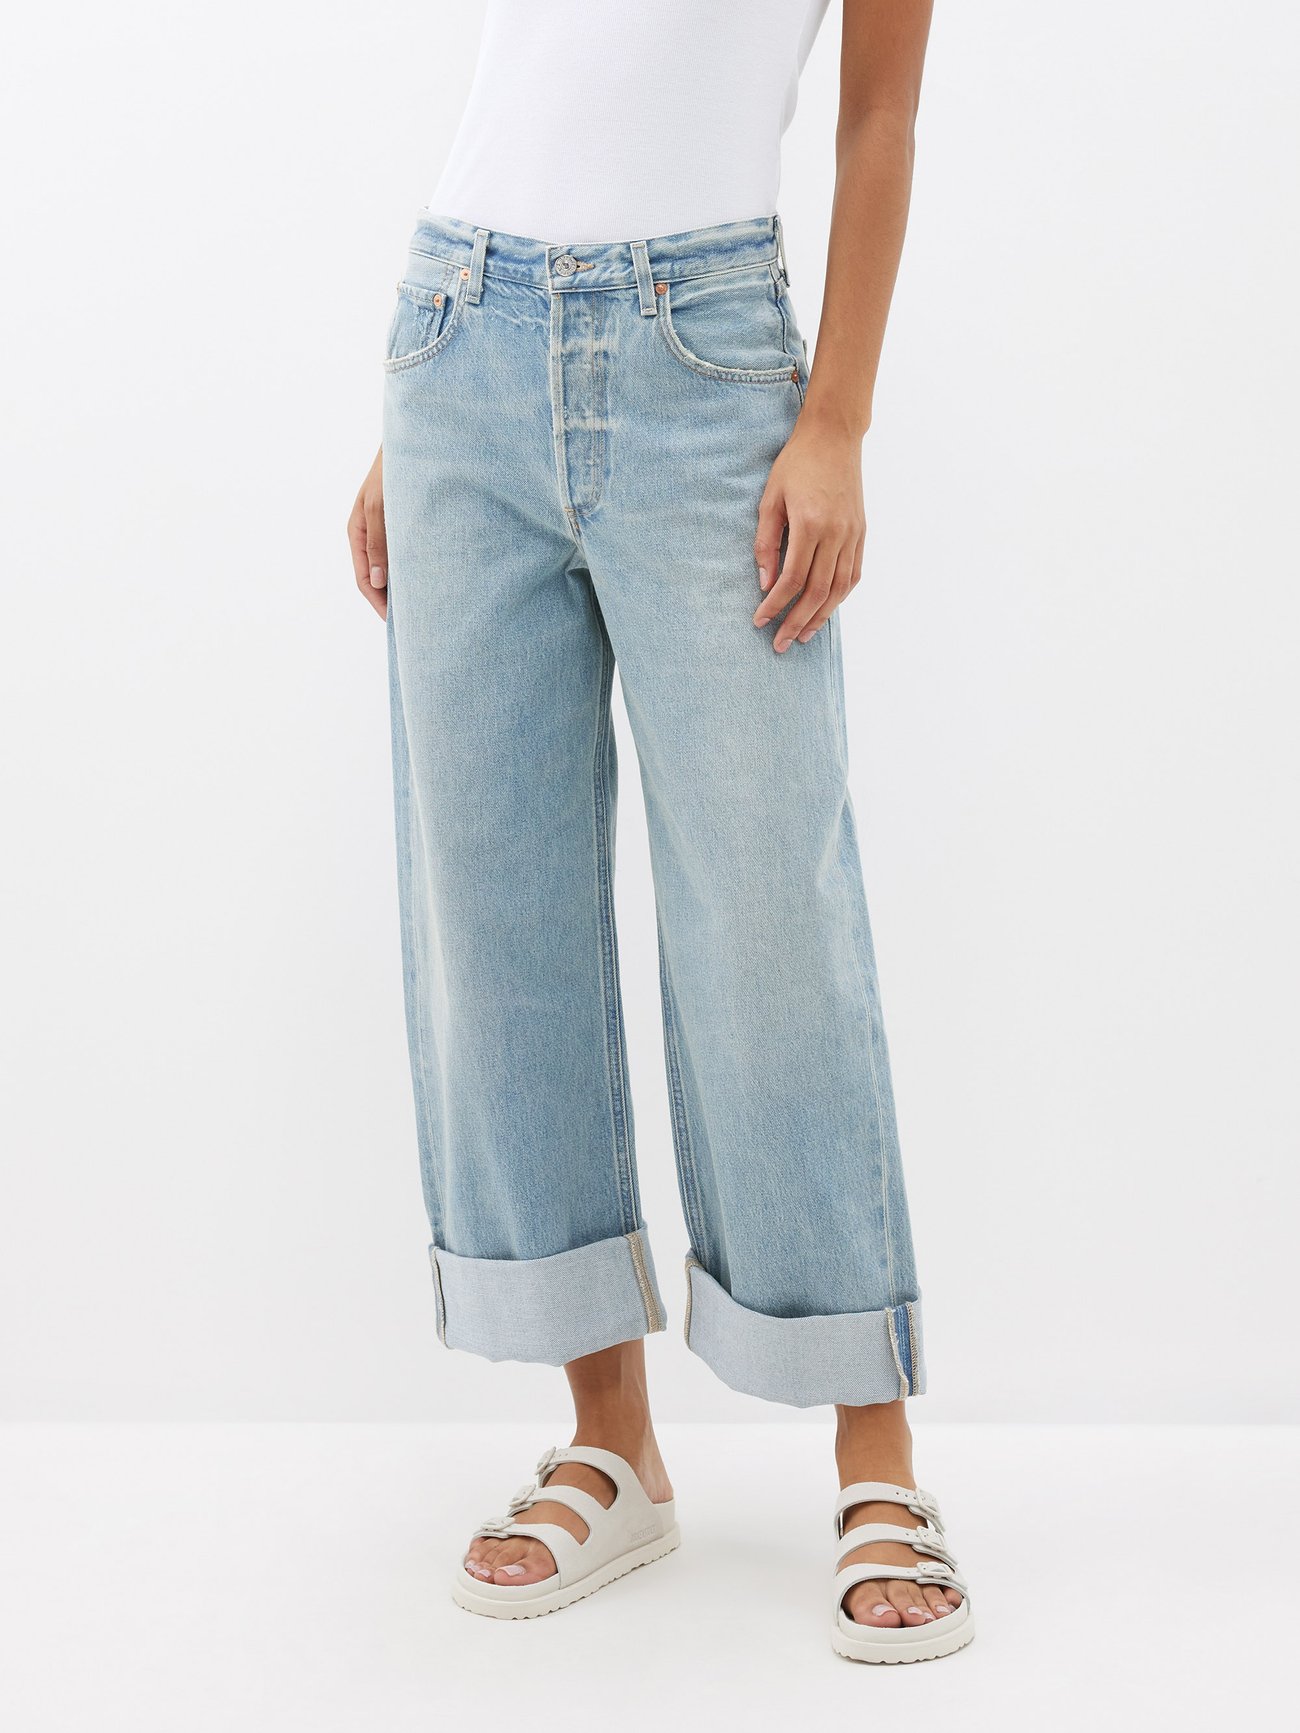 Blue Ayla high-rise cuffed oragnic-cotton jeans | Citizens of Humanity ...